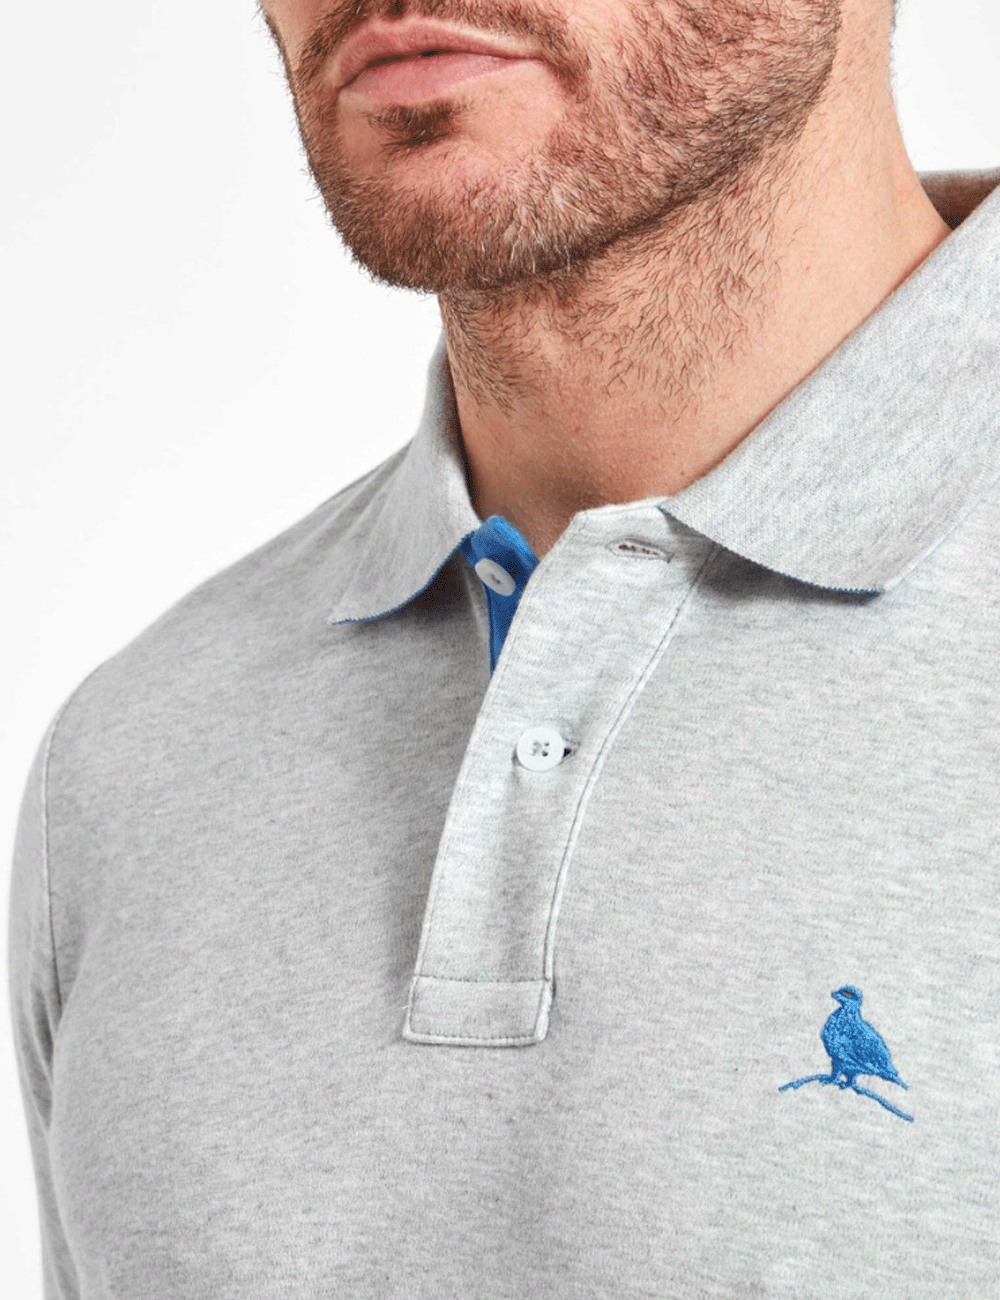 Close up of man wearing the St. Ives Polo at the collar